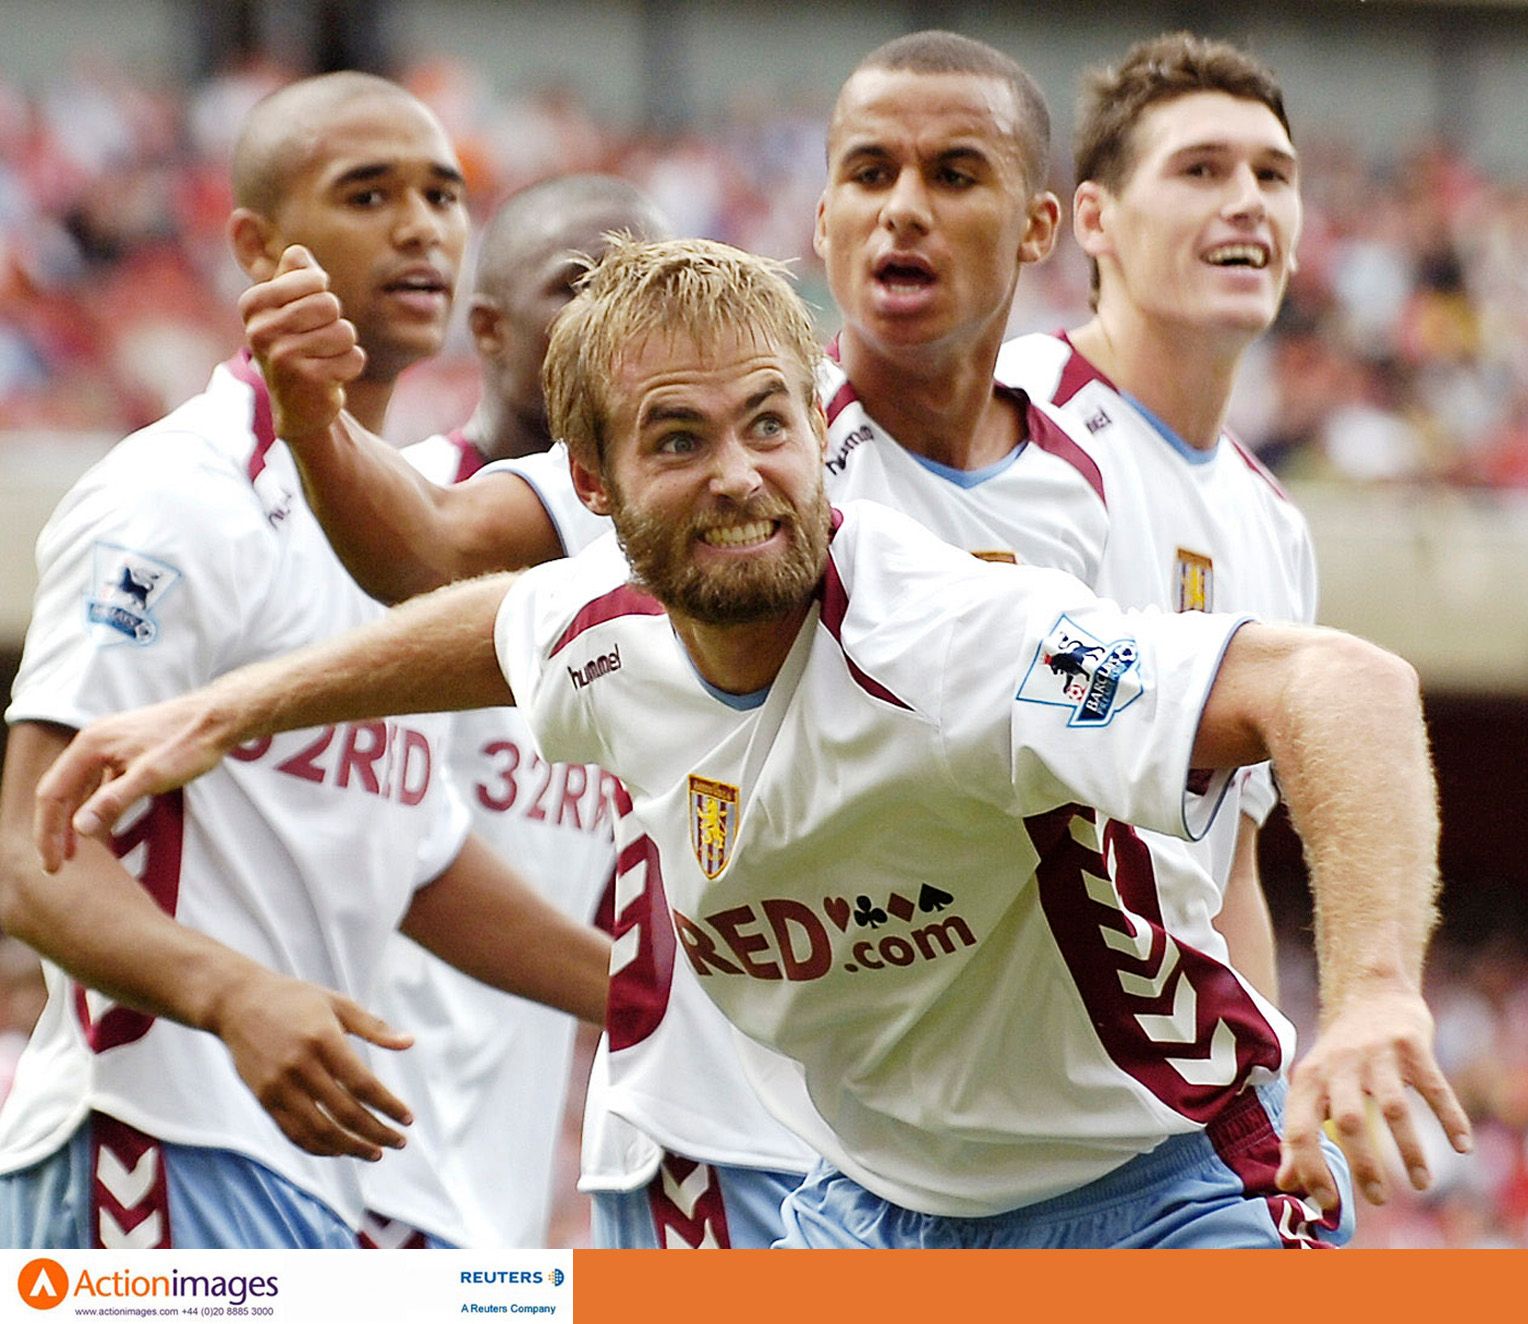 Football - Arsenal v Aston Villa FA Barclays Premiership - Emirates Stadium - 19/8/06 
Olof Mellberg celebrates scoring the first goal for Aston Villa 
Mandatory Credit: Action Images / Tony O'Brien 
Livepic 
NO ONLINE/INTERNET USE WITHOUT A LICENCE FROM THE FOOTBALL DATA CO LTD. FOR LICENCE ENQUIRIES PLEASE TELEPHONE +44 207 298 1656.